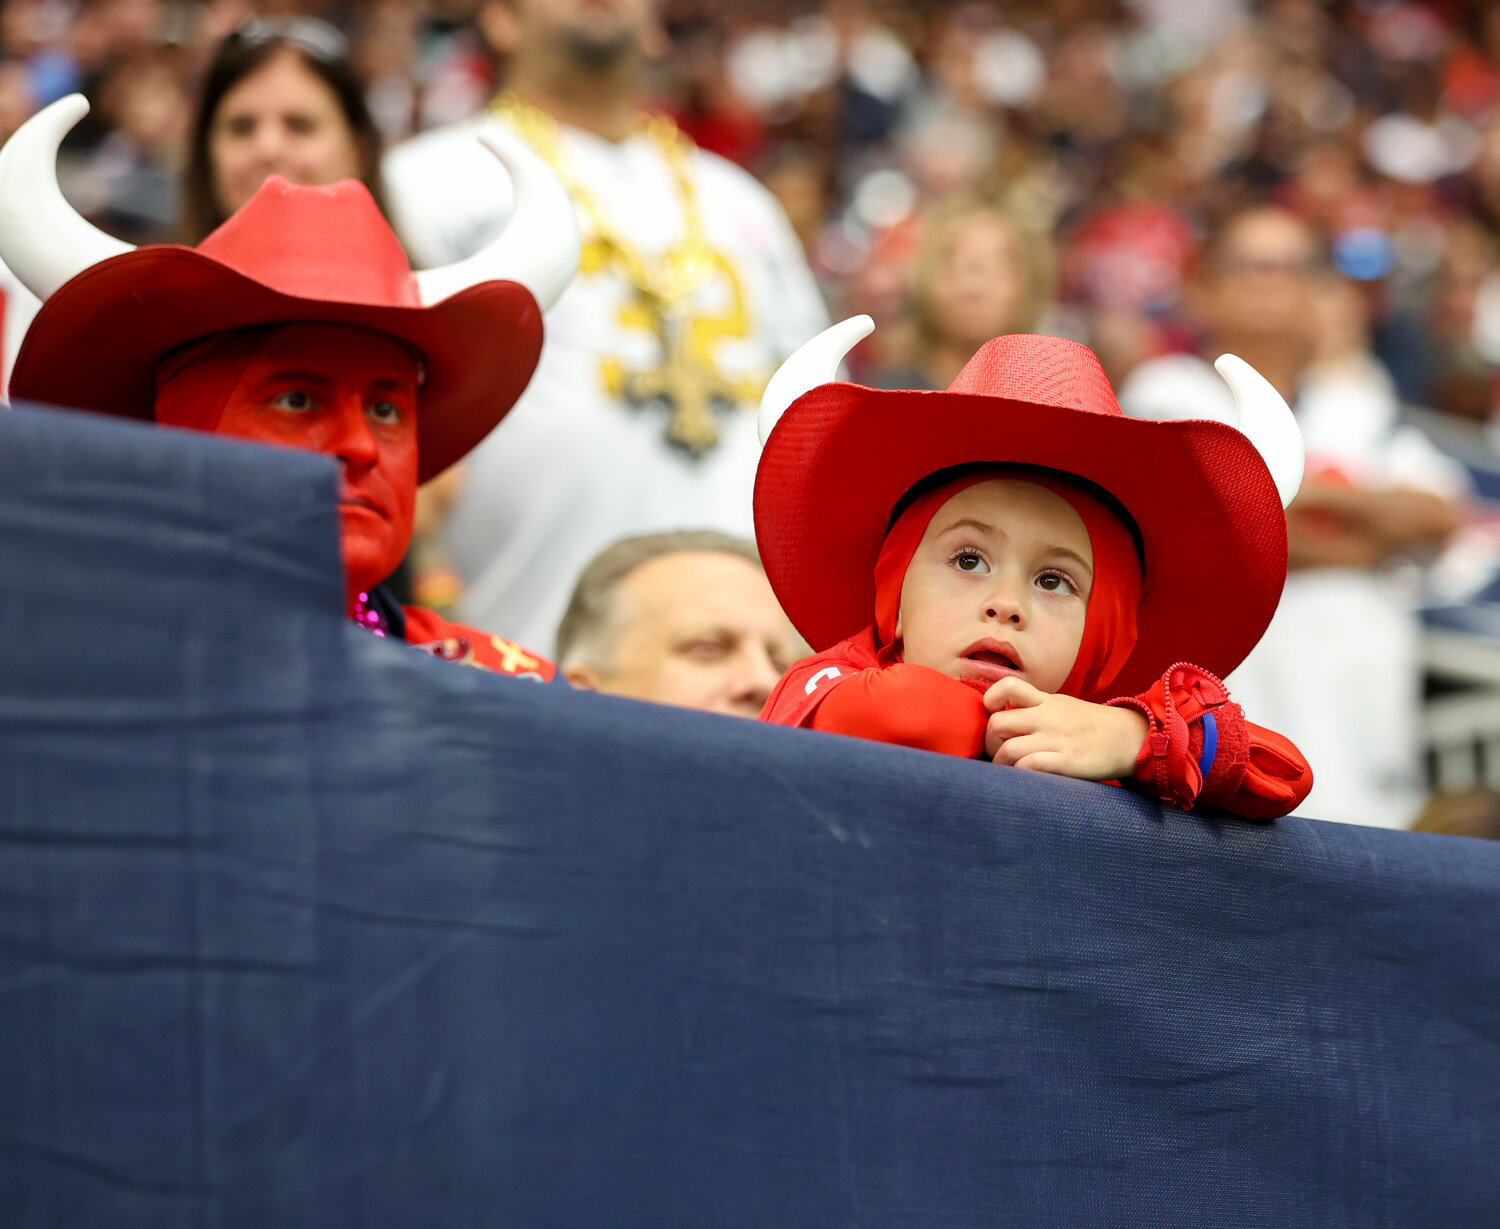 A young Houston Texans fan during an NFL game between the Texans and the Saints on October 15, 2023 in Houston. The Texans won, 20-13.